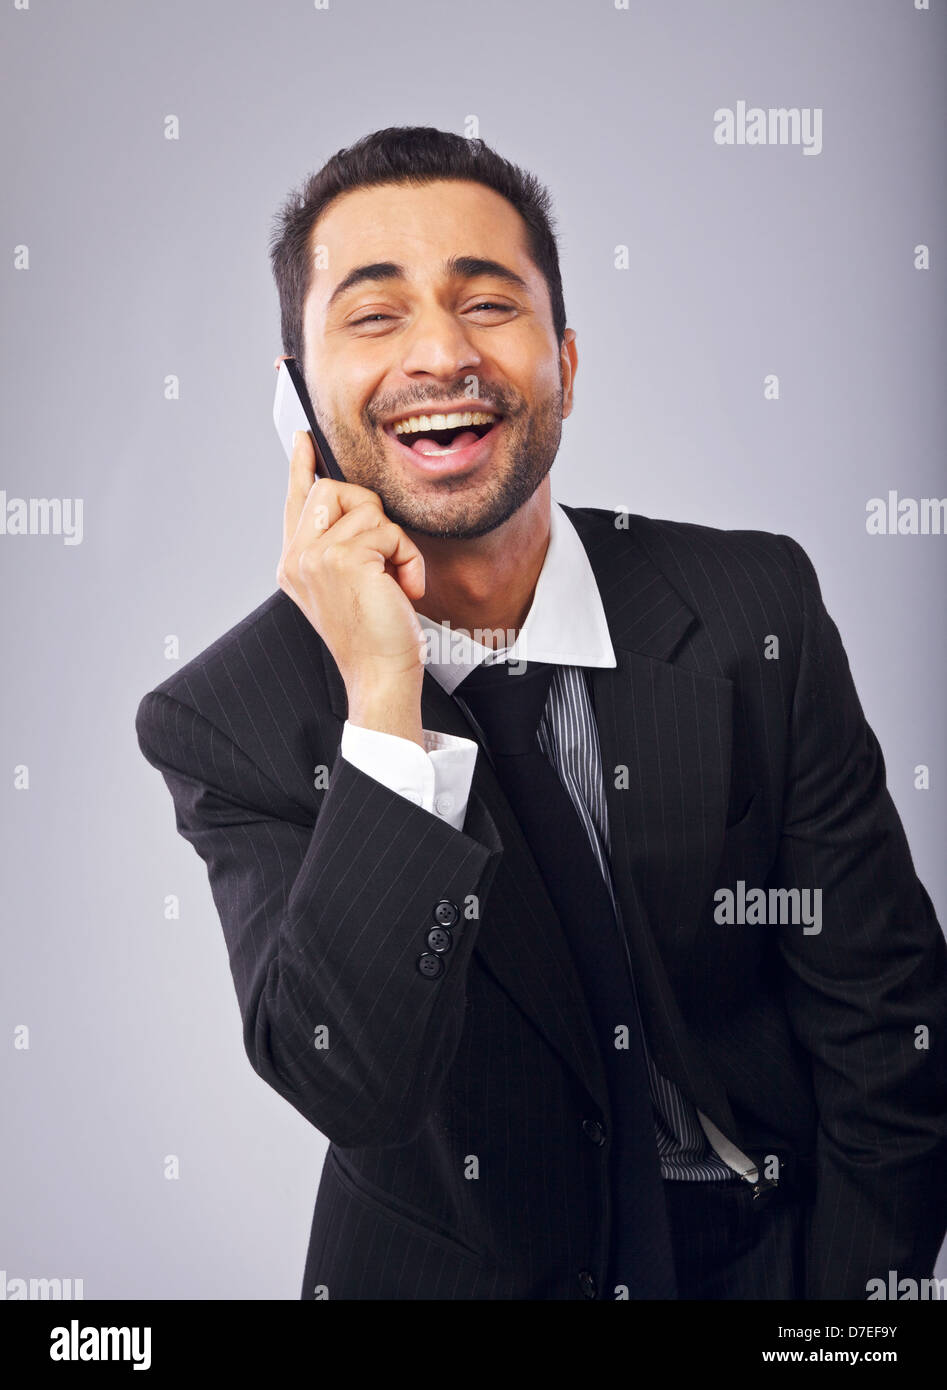 Cheerful young professional laughing while answering a phone call Stock Photo